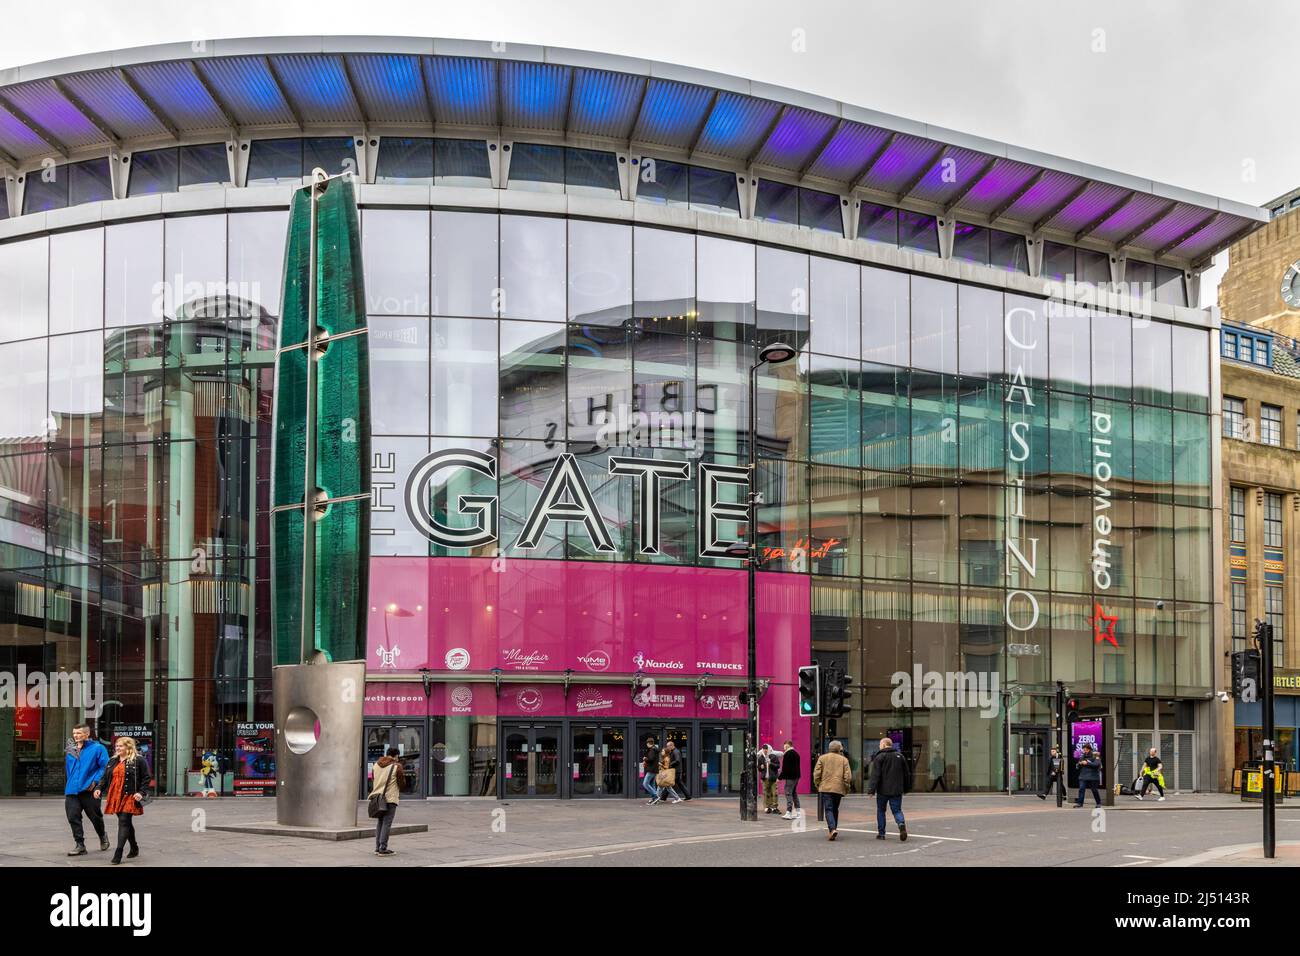 Entrance to The Gate shopping mall, Newcastle upon Tyne, UK Stock Photo ...